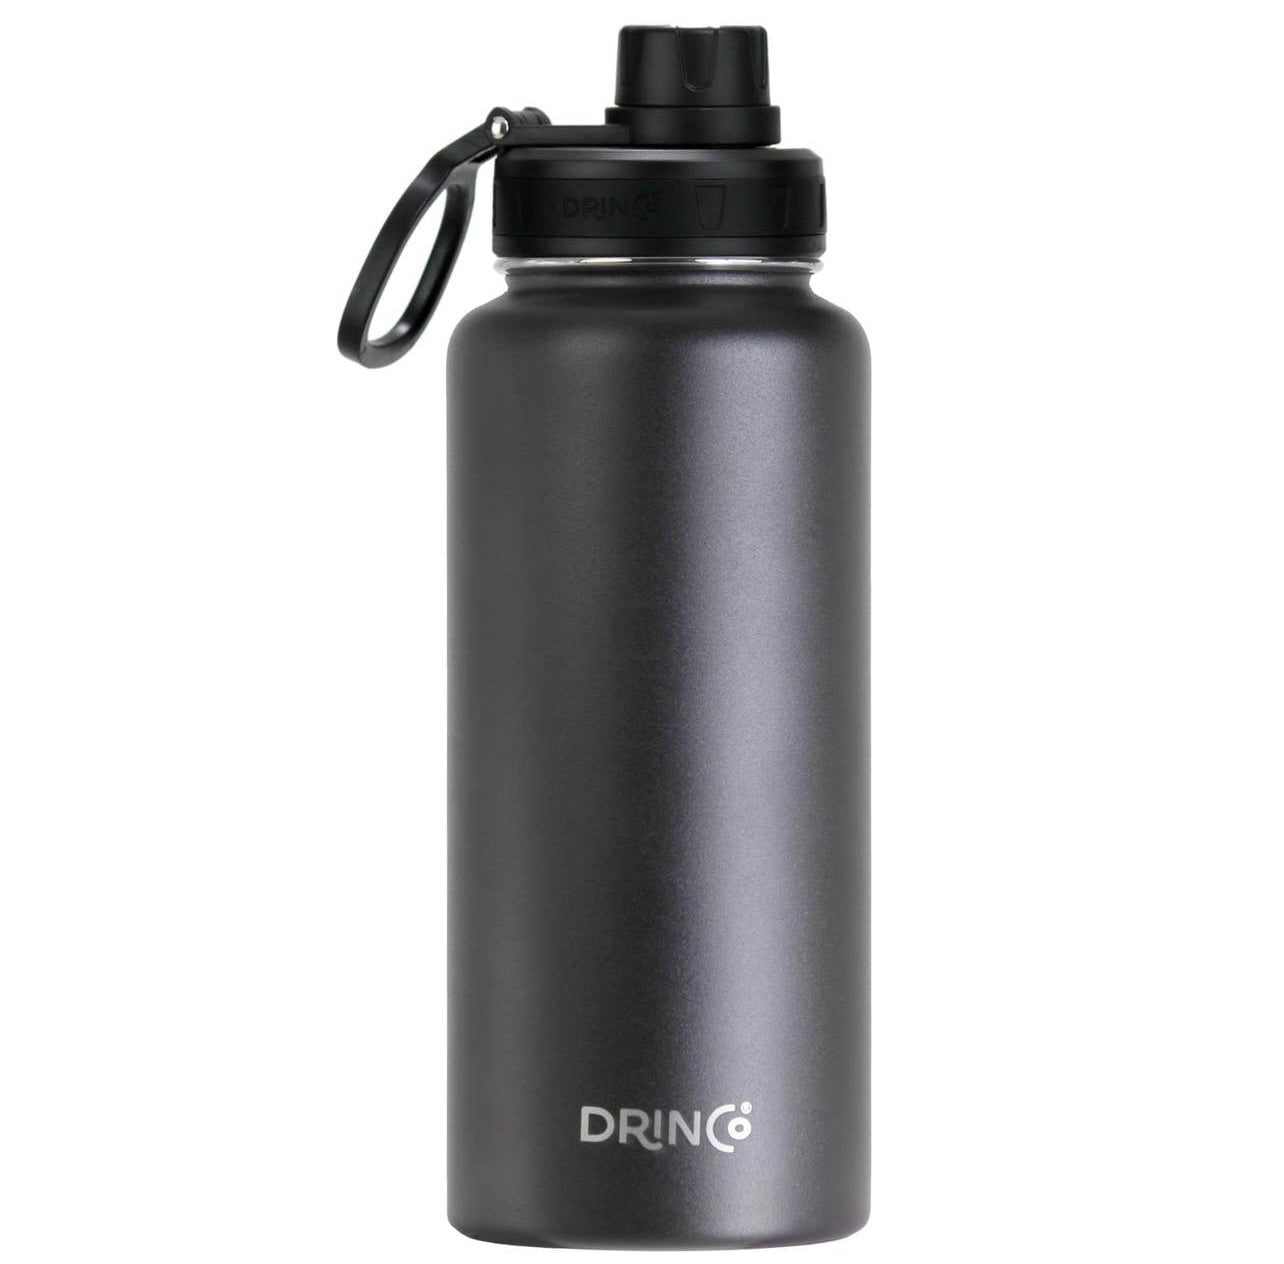 Stainless Steel Insulated Water Bottle by DRINCO